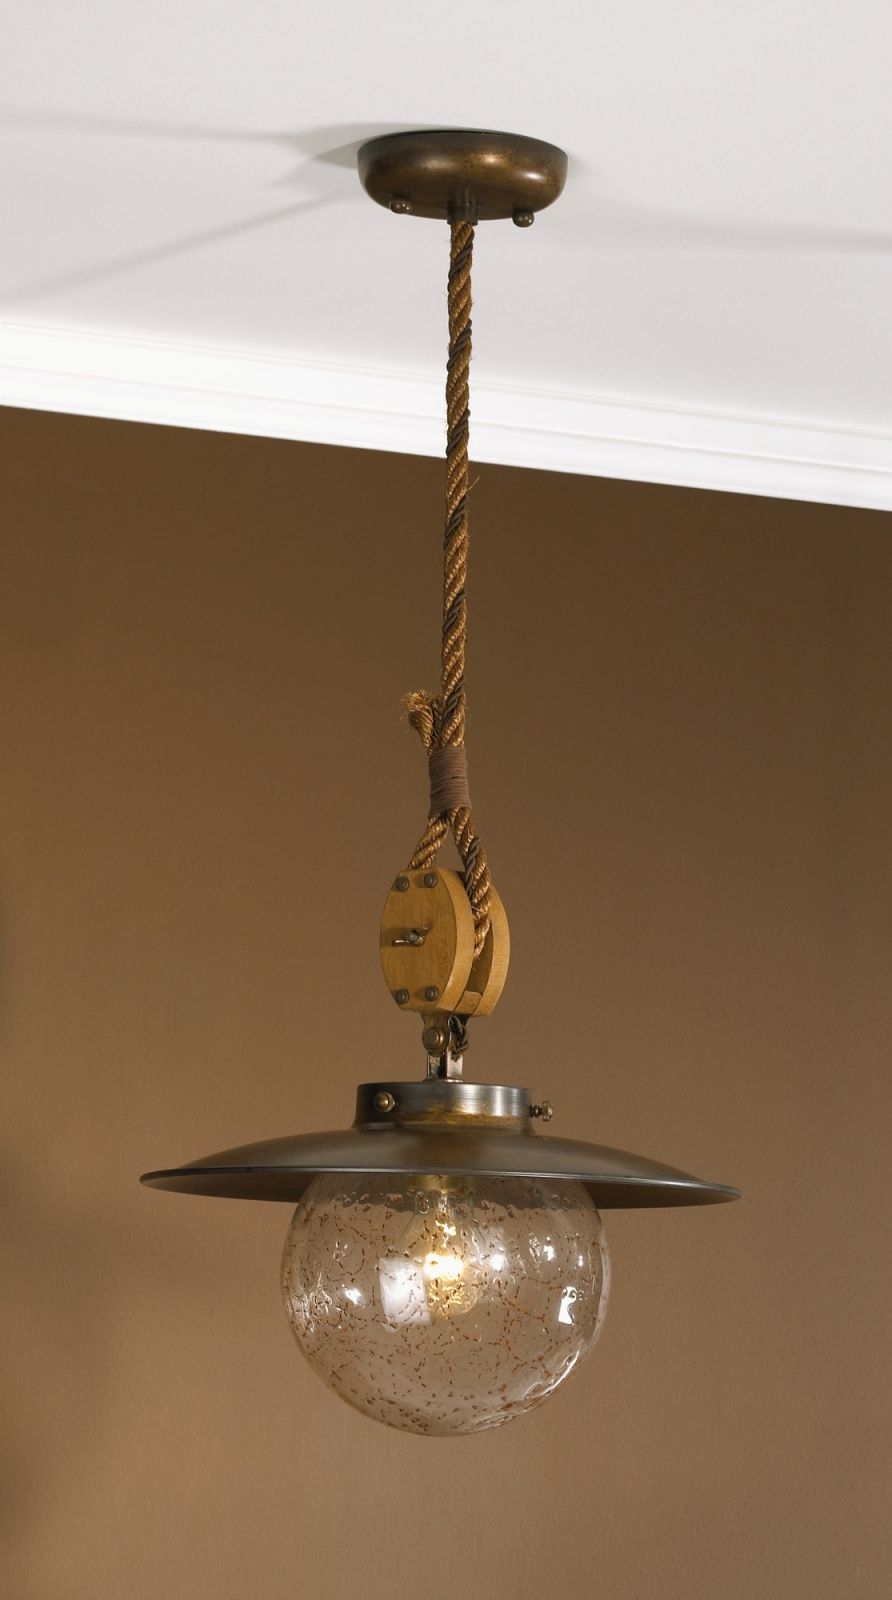 Permalink to Nautical Style Ceiling Light Fixtures